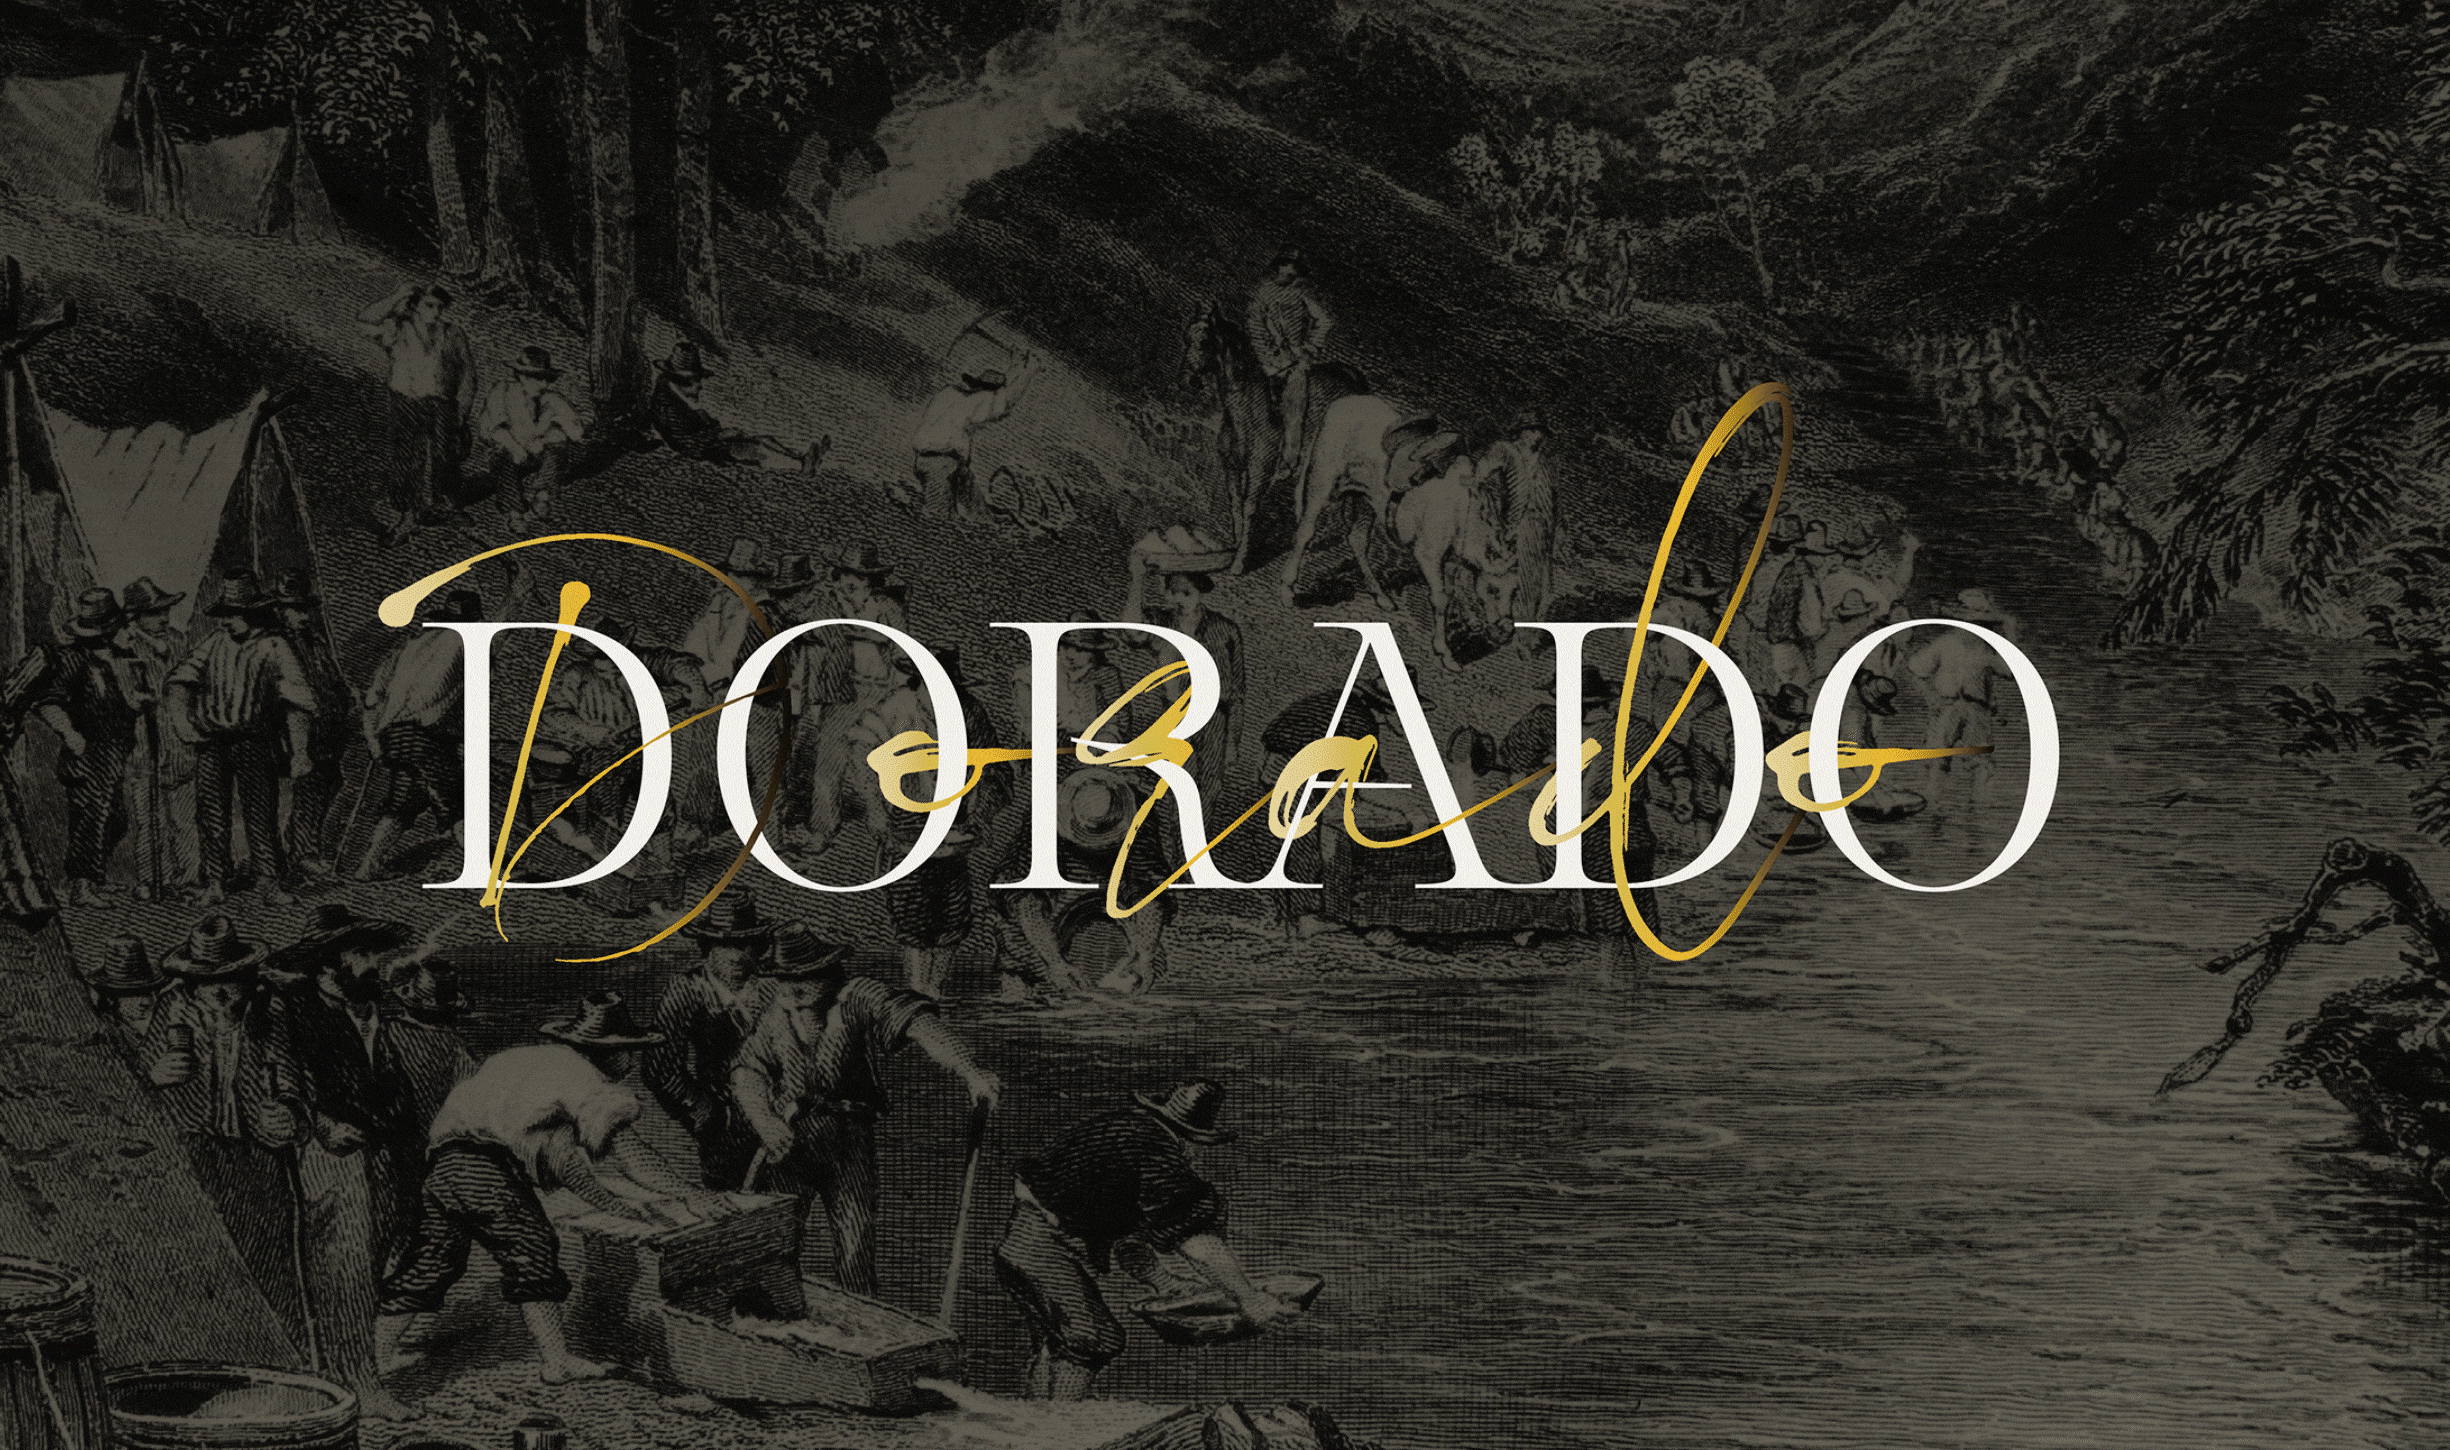 Gif showing various Brand design showing a visual identity for a wine company 'Dorado' based on the american gold rush including packaging, logo and menu.